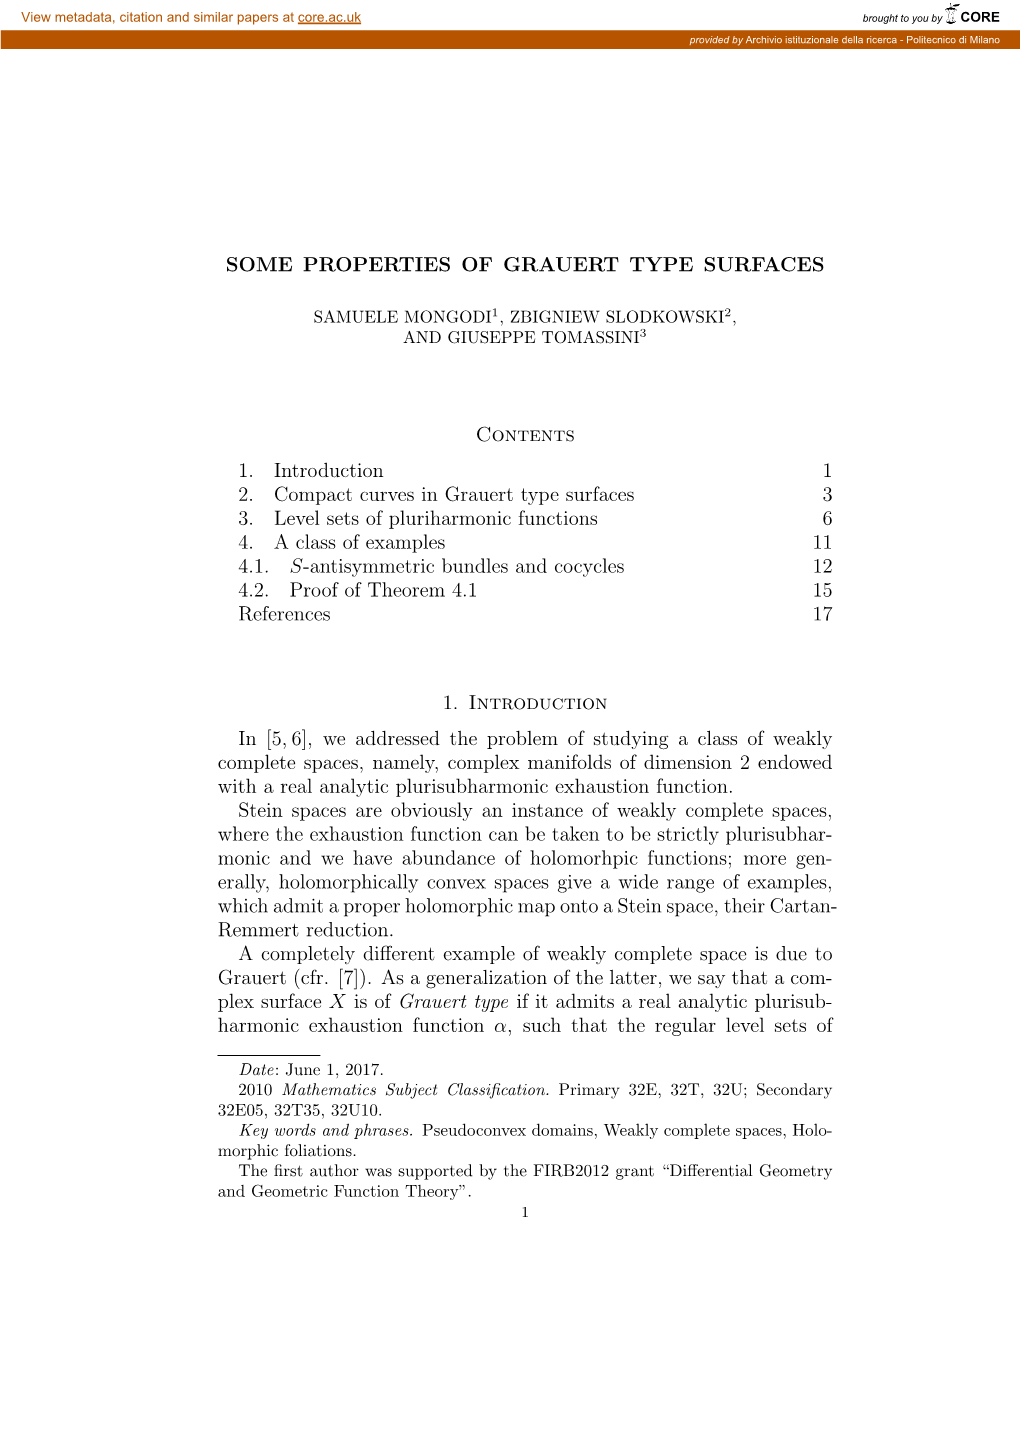 SOME PROPERTIES of GRAUERT TYPE SURFACES Contents 1